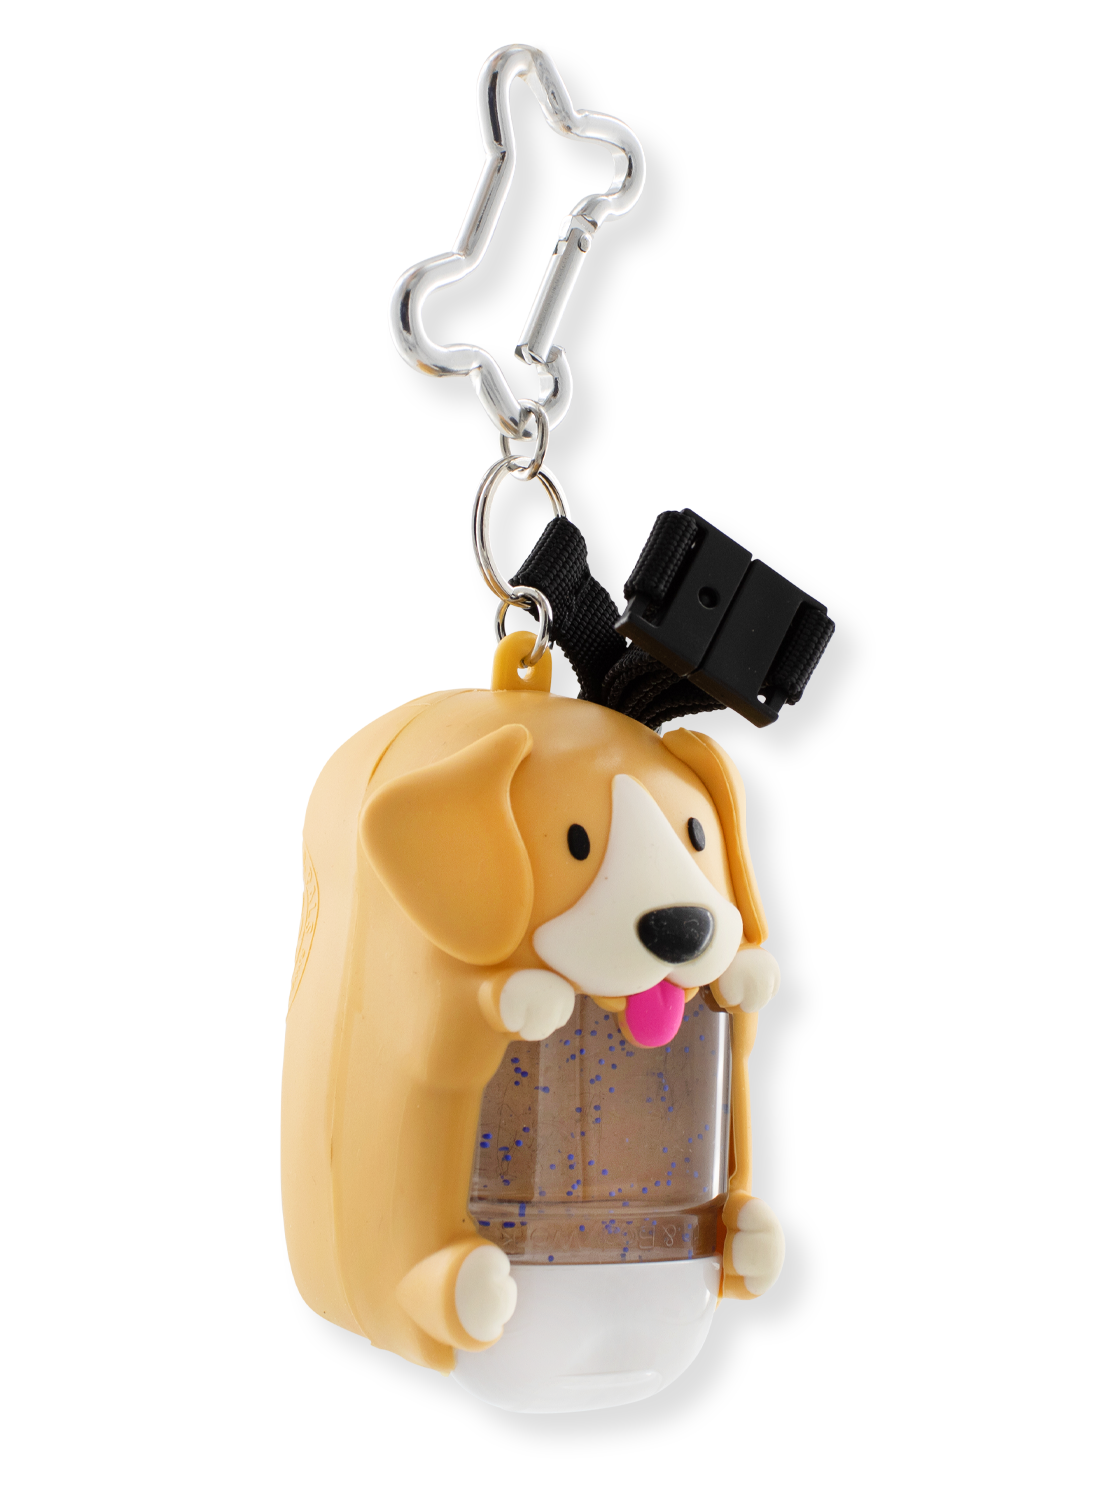 Tag for hand disinfectant gel - Labrador Doggie bag incl. bag - Scout 